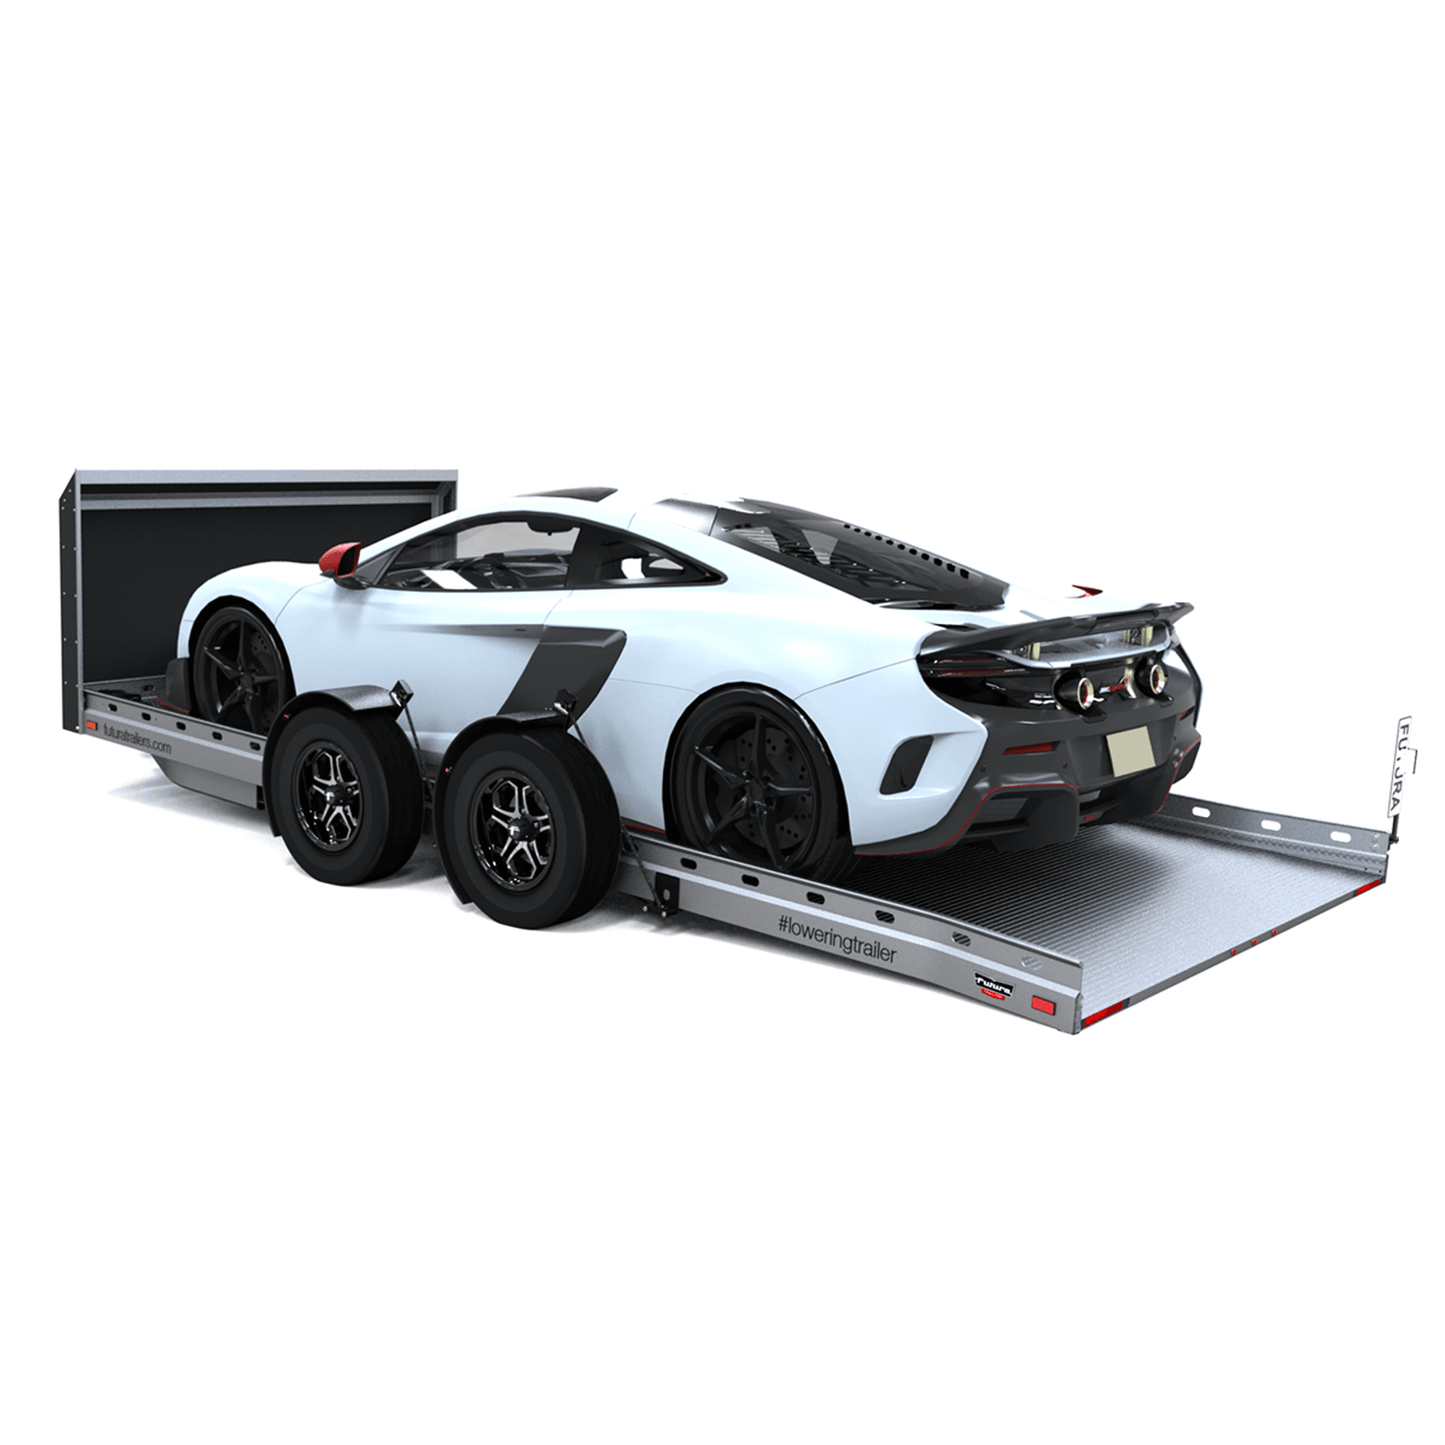 Super Sport Lowering Trailer from $19,495*